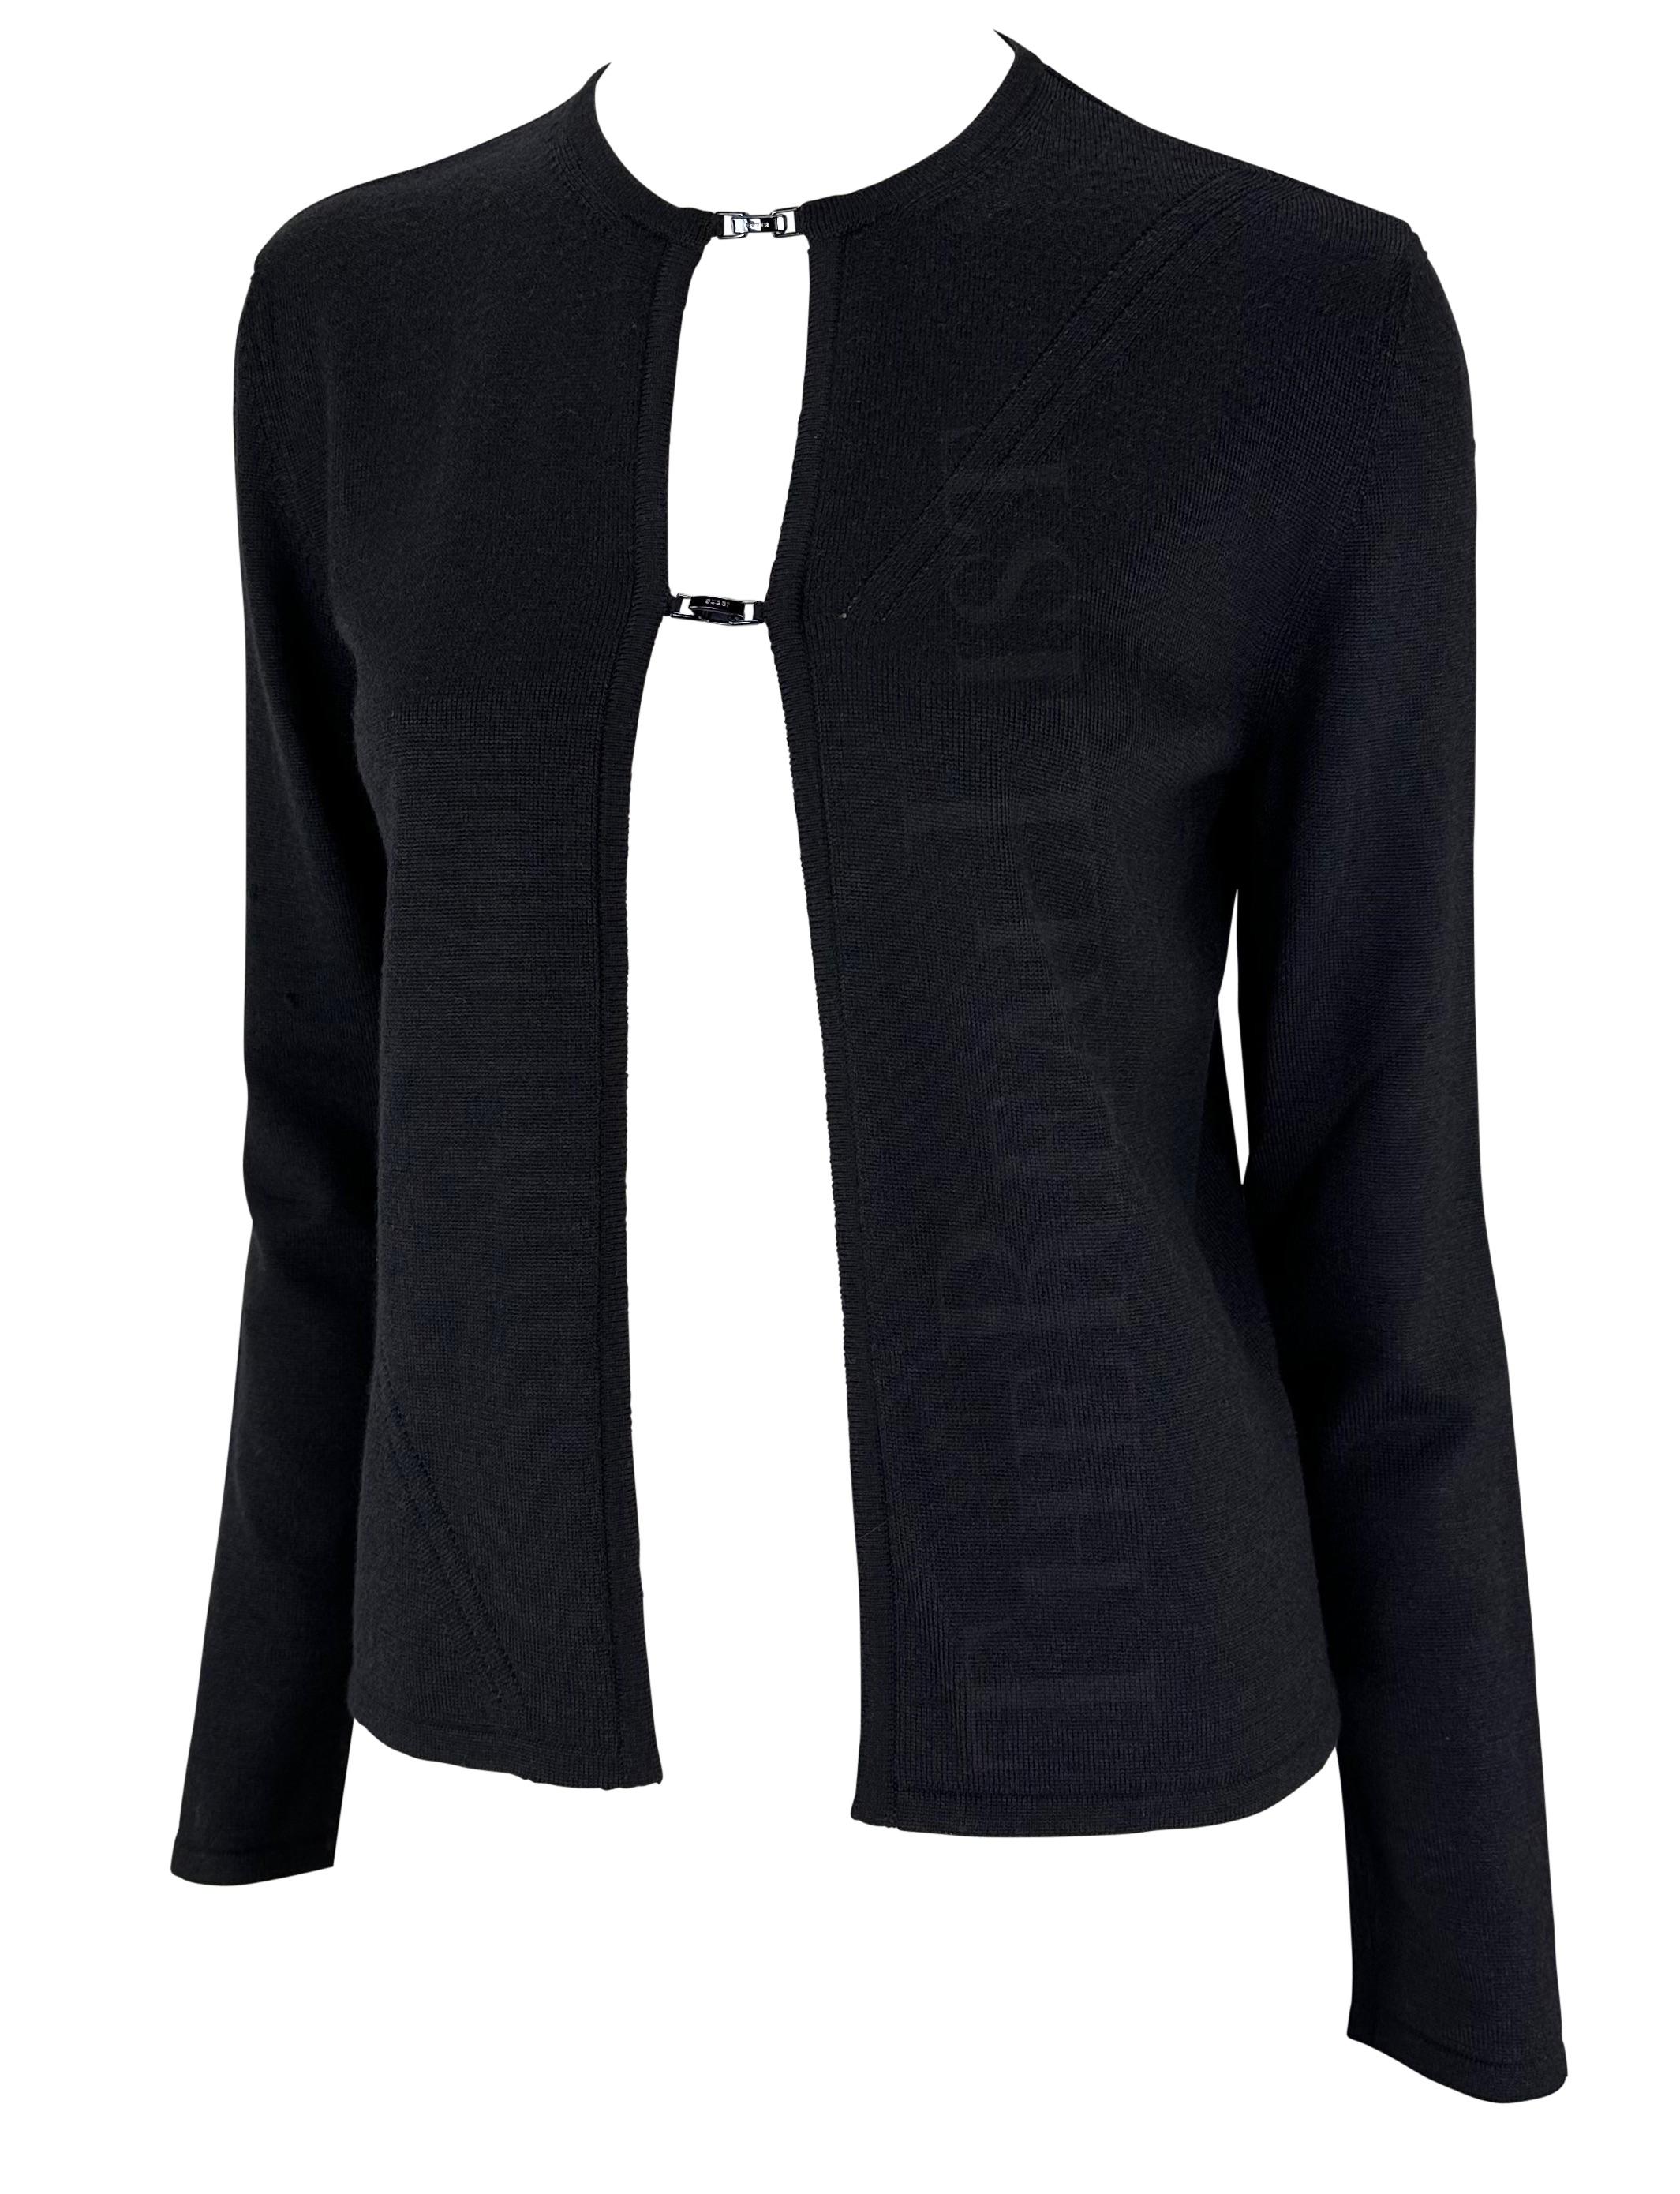 S/S 1998 Gucci by Tom Ford Charcoal Open Logo Buckle Cardigan Top Excellent état - En vente à West Hollywood, CA